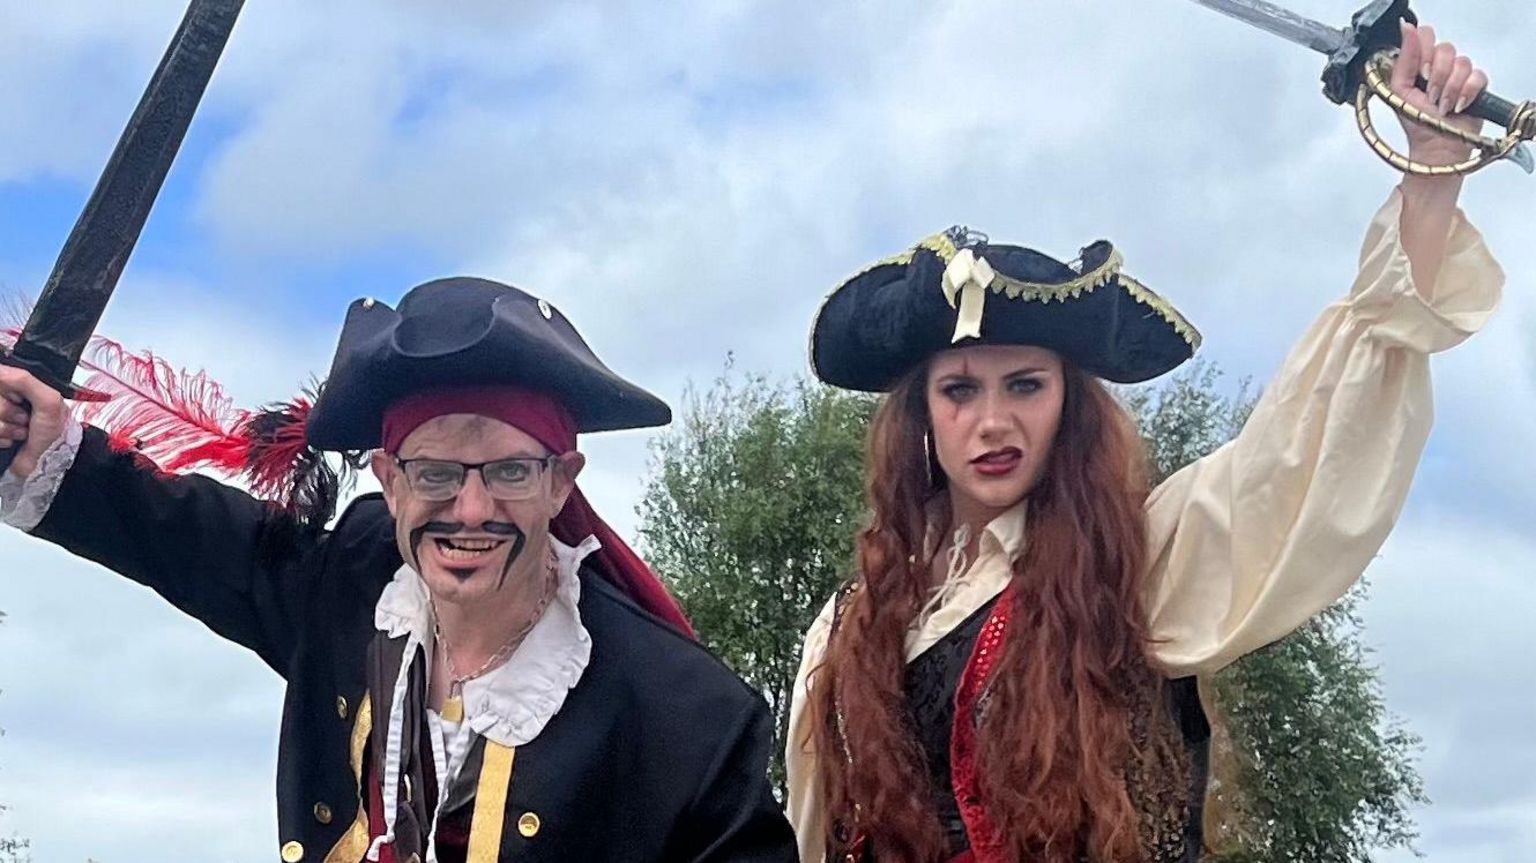 A man, on the left, and a woman, on the right, both looking at the camera and wearing pirate costumes 